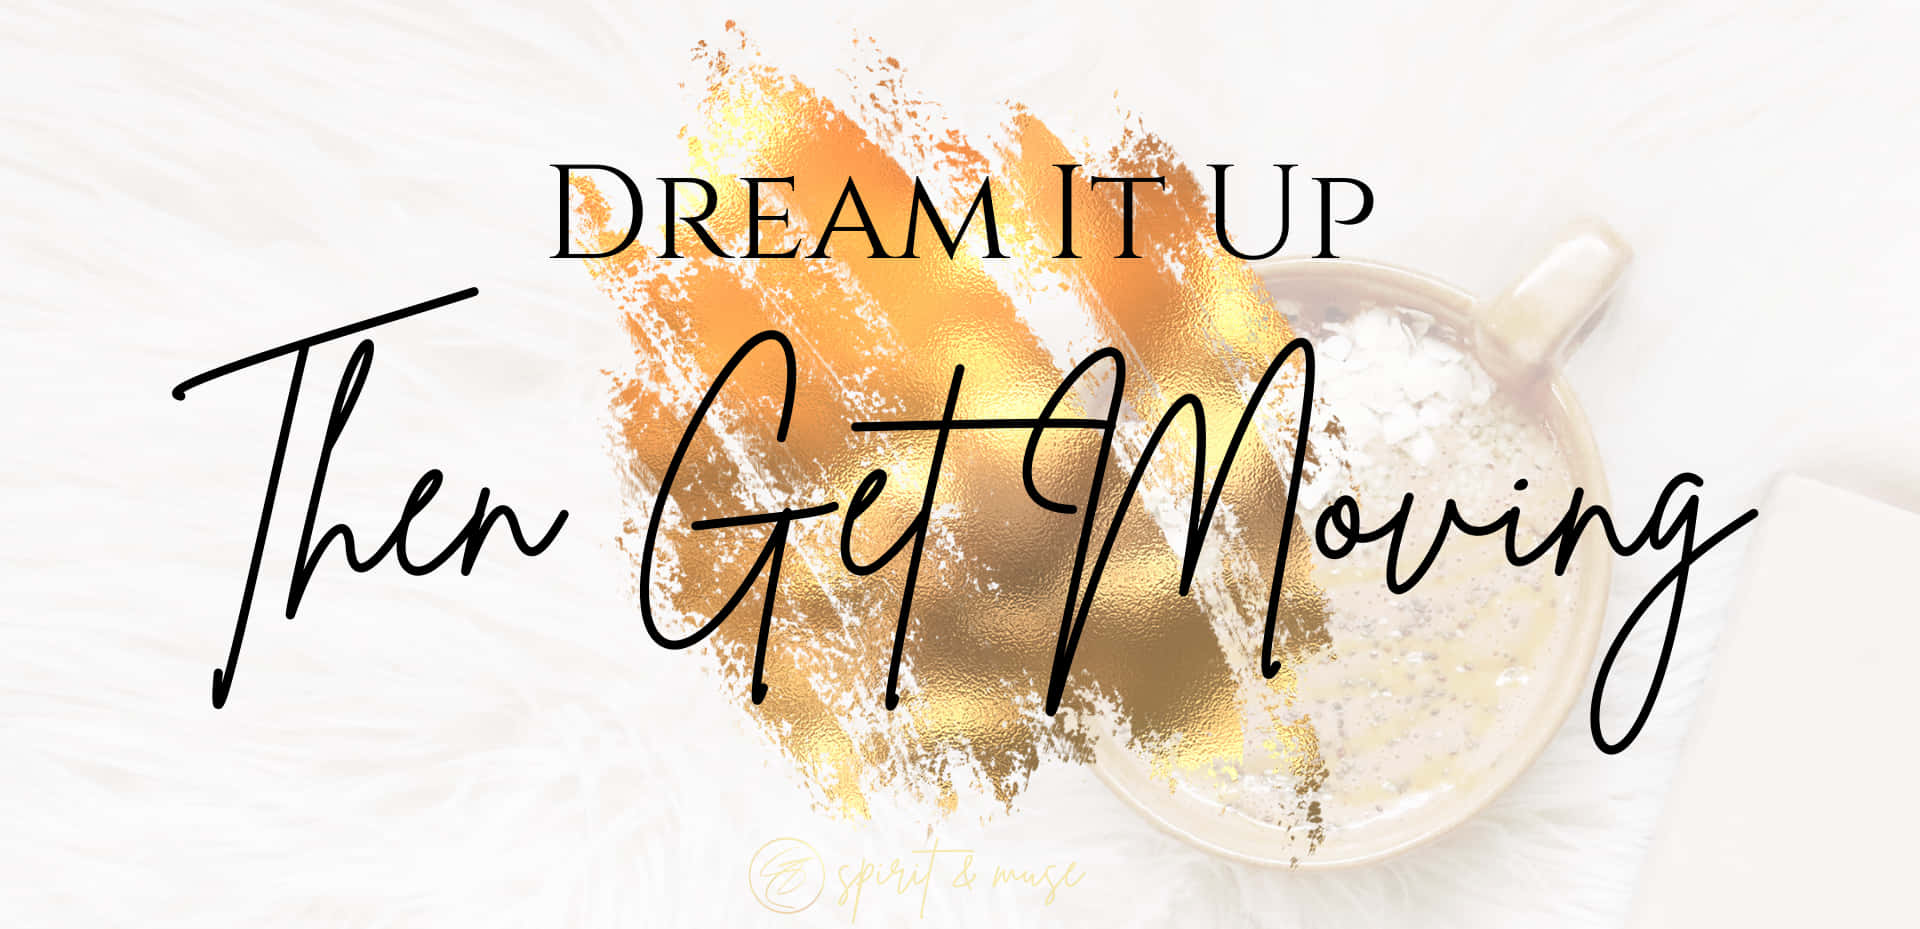 Dream It Up Then Get Moving Wallpaper